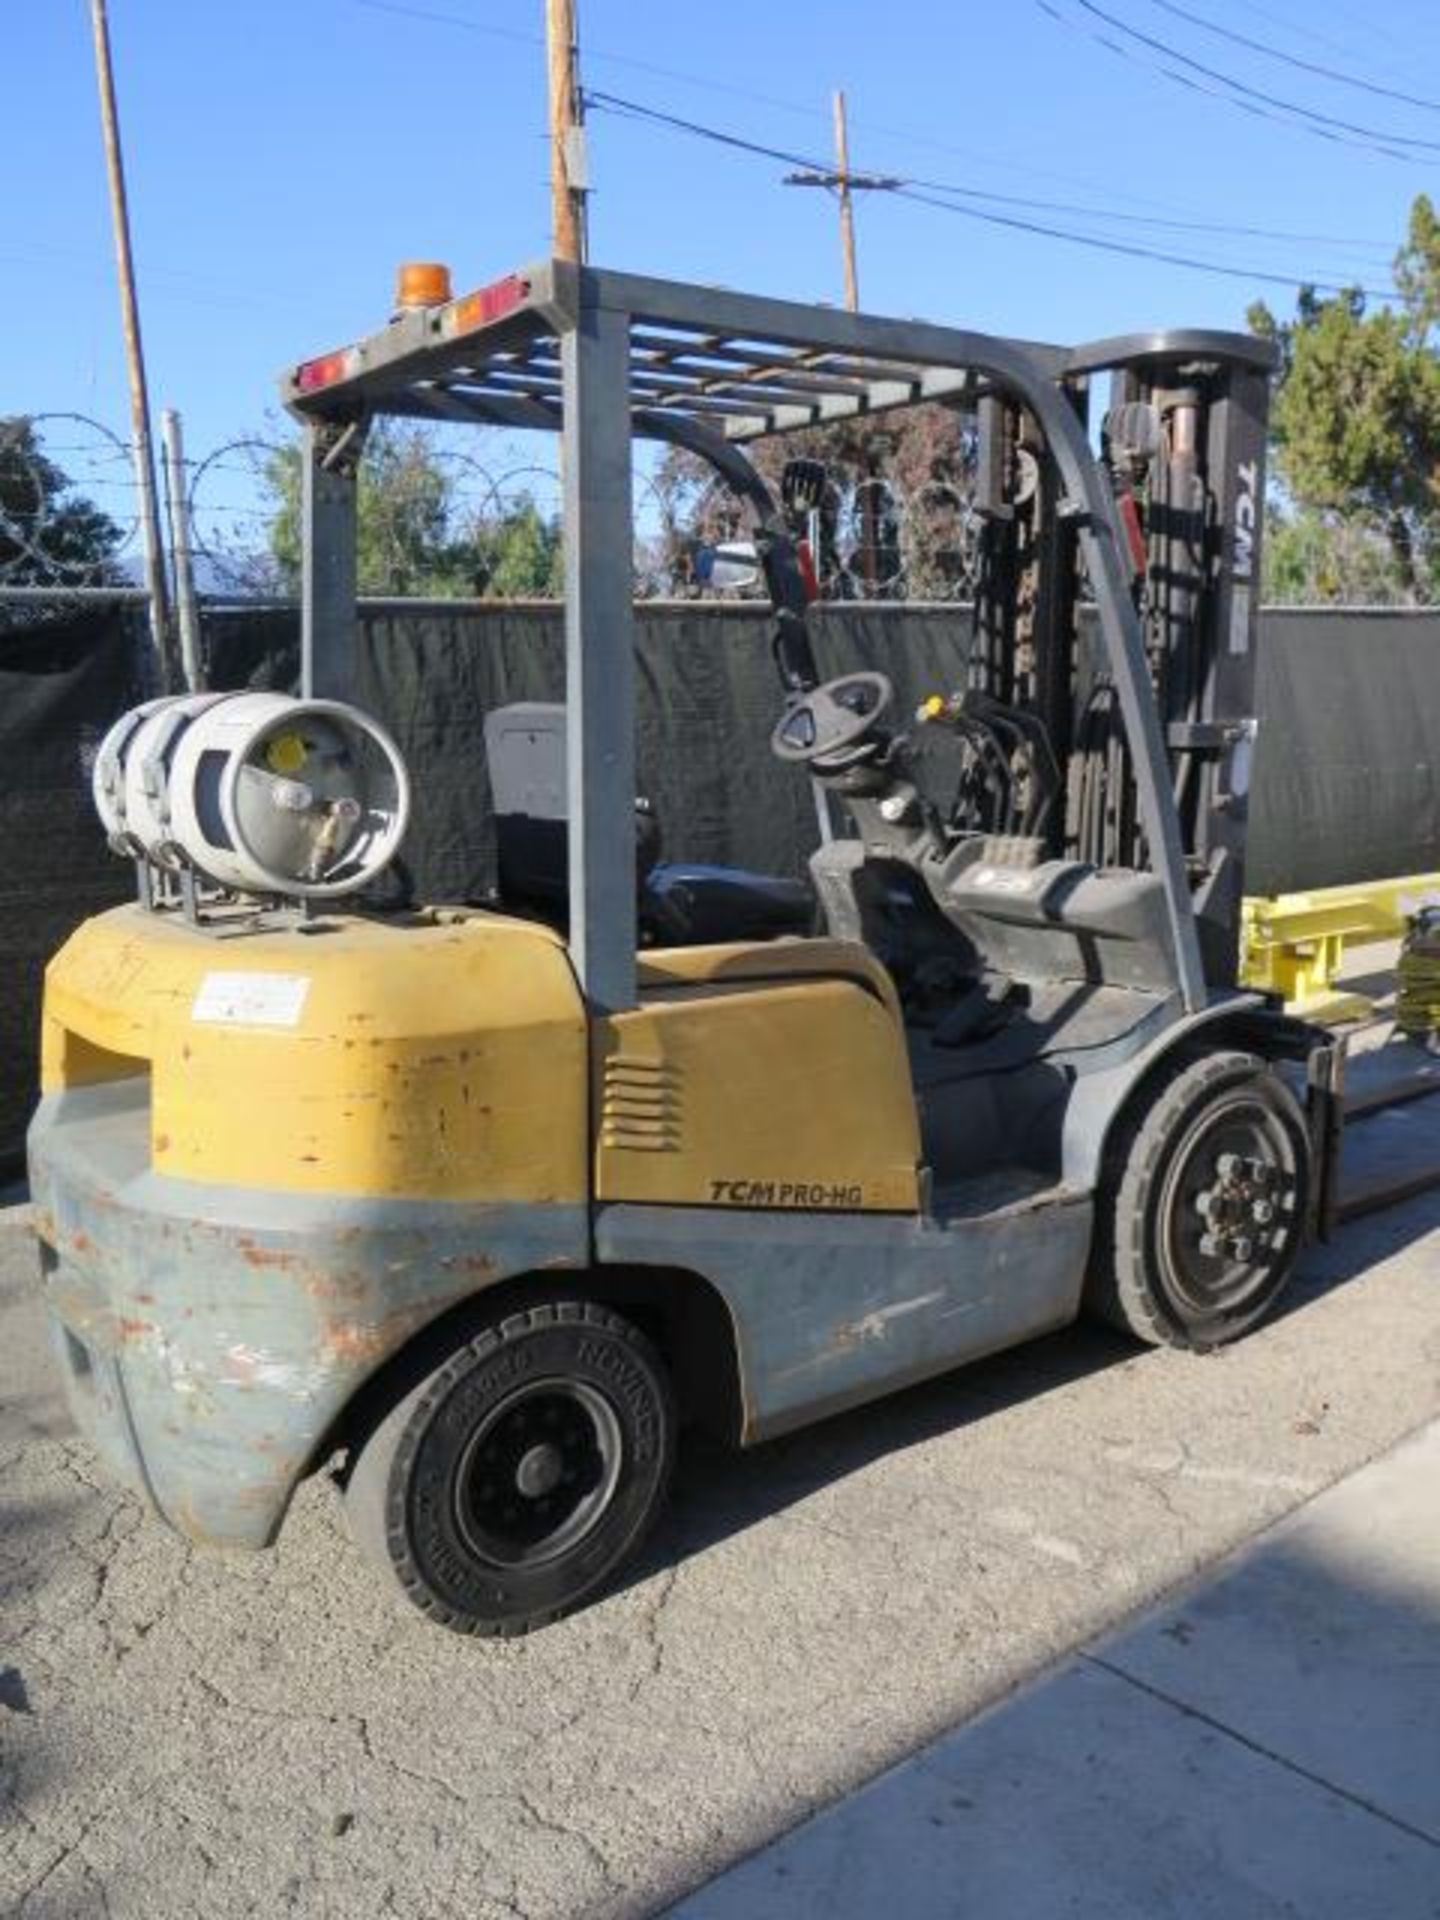 TCM FHG30T3 5300 Lb Cap LPG Forklift s/n 2K901009 w/ 3-Stage Mast, 189" Lift Height, Side Shift, 4th - Image 4 of 15